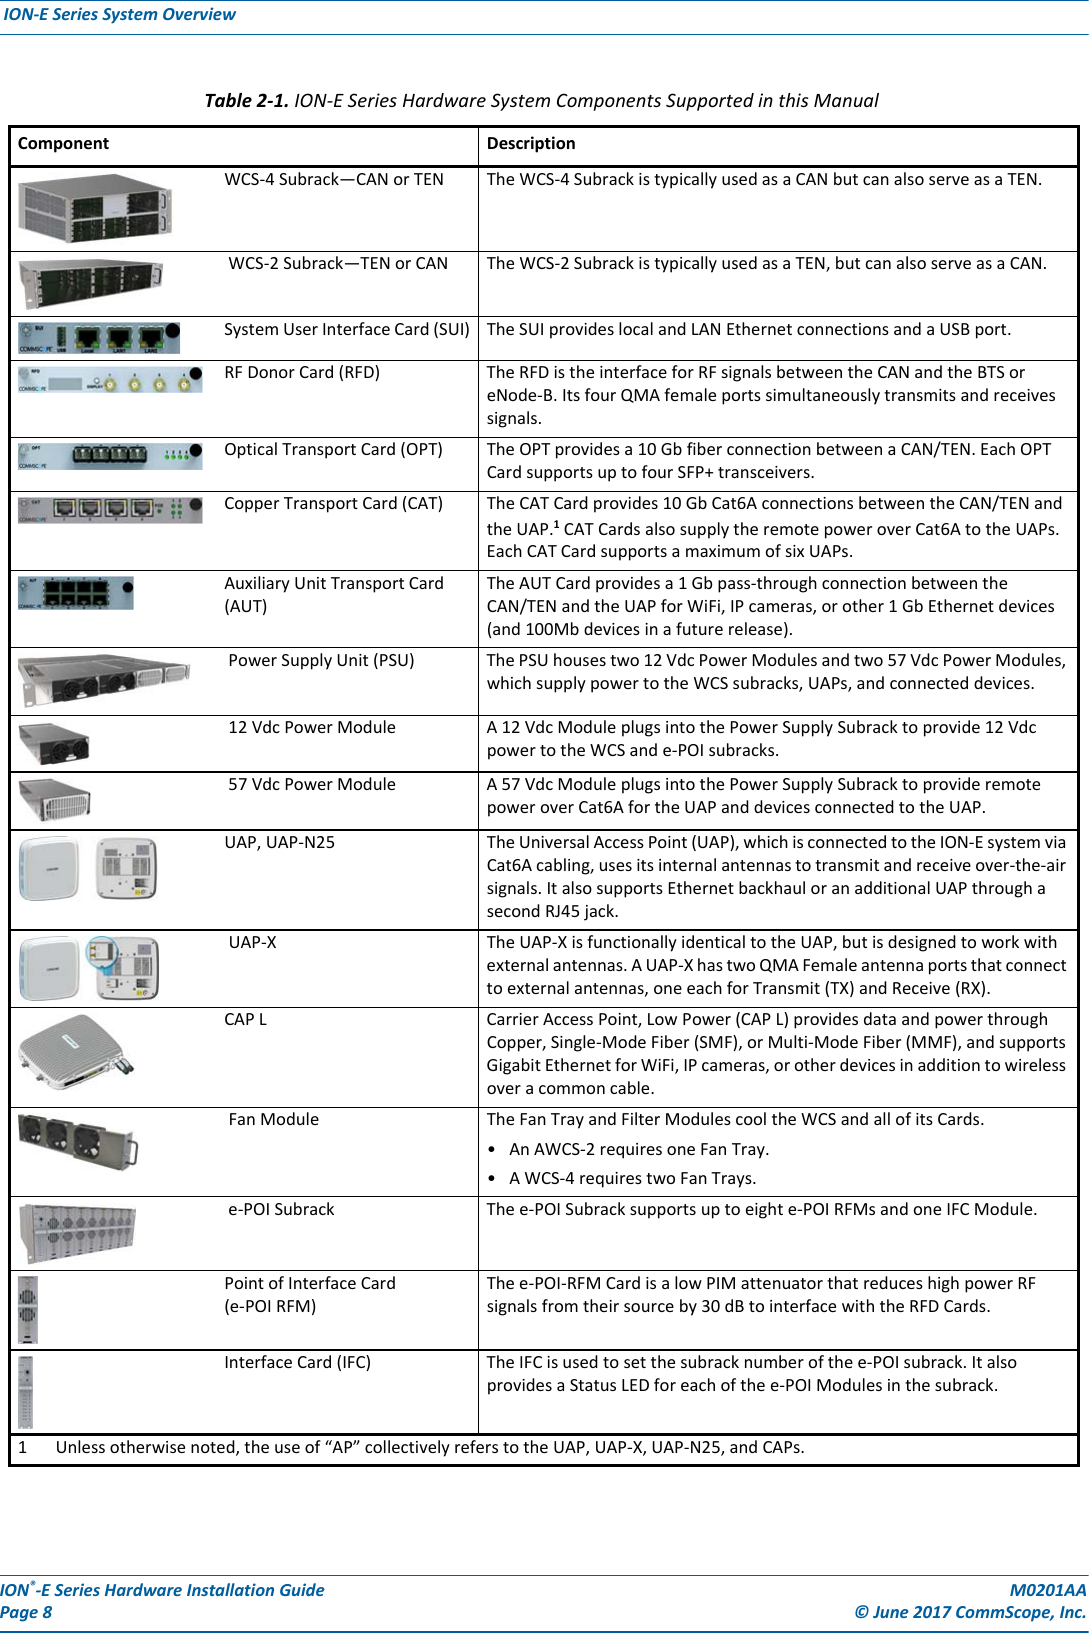 ION®-E Series Hardware Installation Guide M0201AA Page 8 © June 2017 CommScope, Inc. ION-E Series System Overview  Table 2-1. ION-E Series Hardware System Components Supported in this Manual Component  Description WCS-4 Subrack—CAN or TEN The WCS-4 Subrack is typically used as a CAN but can also serve as a TEN.  WCS-2 Subrack—TEN or CAN The WCS-2 Subrack is typically used as a TEN, but can also serve as a CAN. System User Interface Card (SUI) The SUI provides local and LAN Ethernet connections and a USB port. RF Donor Card (RFD) The RFD is the interface for RF signals between the CAN and the BTS or eNode-B. Its four QMA female ports simultaneously transmits and receives signals. Optical Transport Card (OPT) The OPT provides a 10 Gb fiber connection between a CAN/TEN. Each OPT Card supports up to four SFP+ transceivers. Copper Transport Card (CAT) The CAT Card provides 10 Gb Cat6A connections between the CAN/TEN and the UAP.1 CAT Cards also supply the remote power over Cat6A to the UAPs. Each CAT Card supports a maximum of six UAPs. Auxiliary Unit Transport Card (AUT)The AUT Card provides a 1 Gb pass-through connection between the CAN/TEN and the UAP for WiFi, IP cameras, or other 1 Gb Ethernet devices (and 100Mb devices in a future release).  Power Supply Unit (PSU) The PSU houses two 12 Vdc Power Modules and two 57 Vdc Power Modules, which supply power to the WCS subracks, UAPs, and connected devices.  12 Vdc Power Module A 12 Vdc Module plugs into the Power Supply Subrack to provide 12 Vdc power to the WCS and e-POI subracks.  57 Vdc Power Module A 57 Vdc Module plugs into the Power Supply Subrack to provide remote power over Cat6A for the UAP and devices connected to the UAP. UAP, UAP-N25 The Universal Access Point (UAP), which is connected to the ION-E system via Cat6A cabling, uses its internal antennas to transmit and receive over-the-air signals. It also supports Ethernet backhaul or an additional UAP through a second RJ45 jack.  UAP-X The UAP-X is functionally identical to the UAP, but is designed to work with external antennas. A UAP-X has two QMA Female antenna ports that connect to external antennas, one each for Transmit (TX) and Receive (RX).CAP L Carrier Access Point, Low Power (CAP L) provides data and power through Copper, Single-Mode Fiber (SMF), or Multi-Mode Fiber (MMF), and supports Gigabit Ethernet for WiFi, IP cameras, or other devices in addition to wireless over a common cable.  Fan Module The Fan Tray and Filter Modules cool the WCS and all of its Cards. • An AWCS-2 requires one Fan Tray. • A WCS-4 requires two Fan Trays.  e-POI Subrack The e-POI Subrack supports up to eight e-POI RFMs and one IFC Module. Point of Interface Card  (e-POI RFM)The e-POI-RFM Card is a low PIM attenuator that reduces high power RF signals from their source by 30 dB to interface with the RFD Cards. Interface Card (IFC) The IFC is used to set the subrack number of the e-POI subrack. It also provides a Status LED for each of the e-POI Modules in the subrack.1 Unless otherwise noted, the use of “AP” collectively refers to the UAP, UAP-X, UAP-N25, and CAPs.